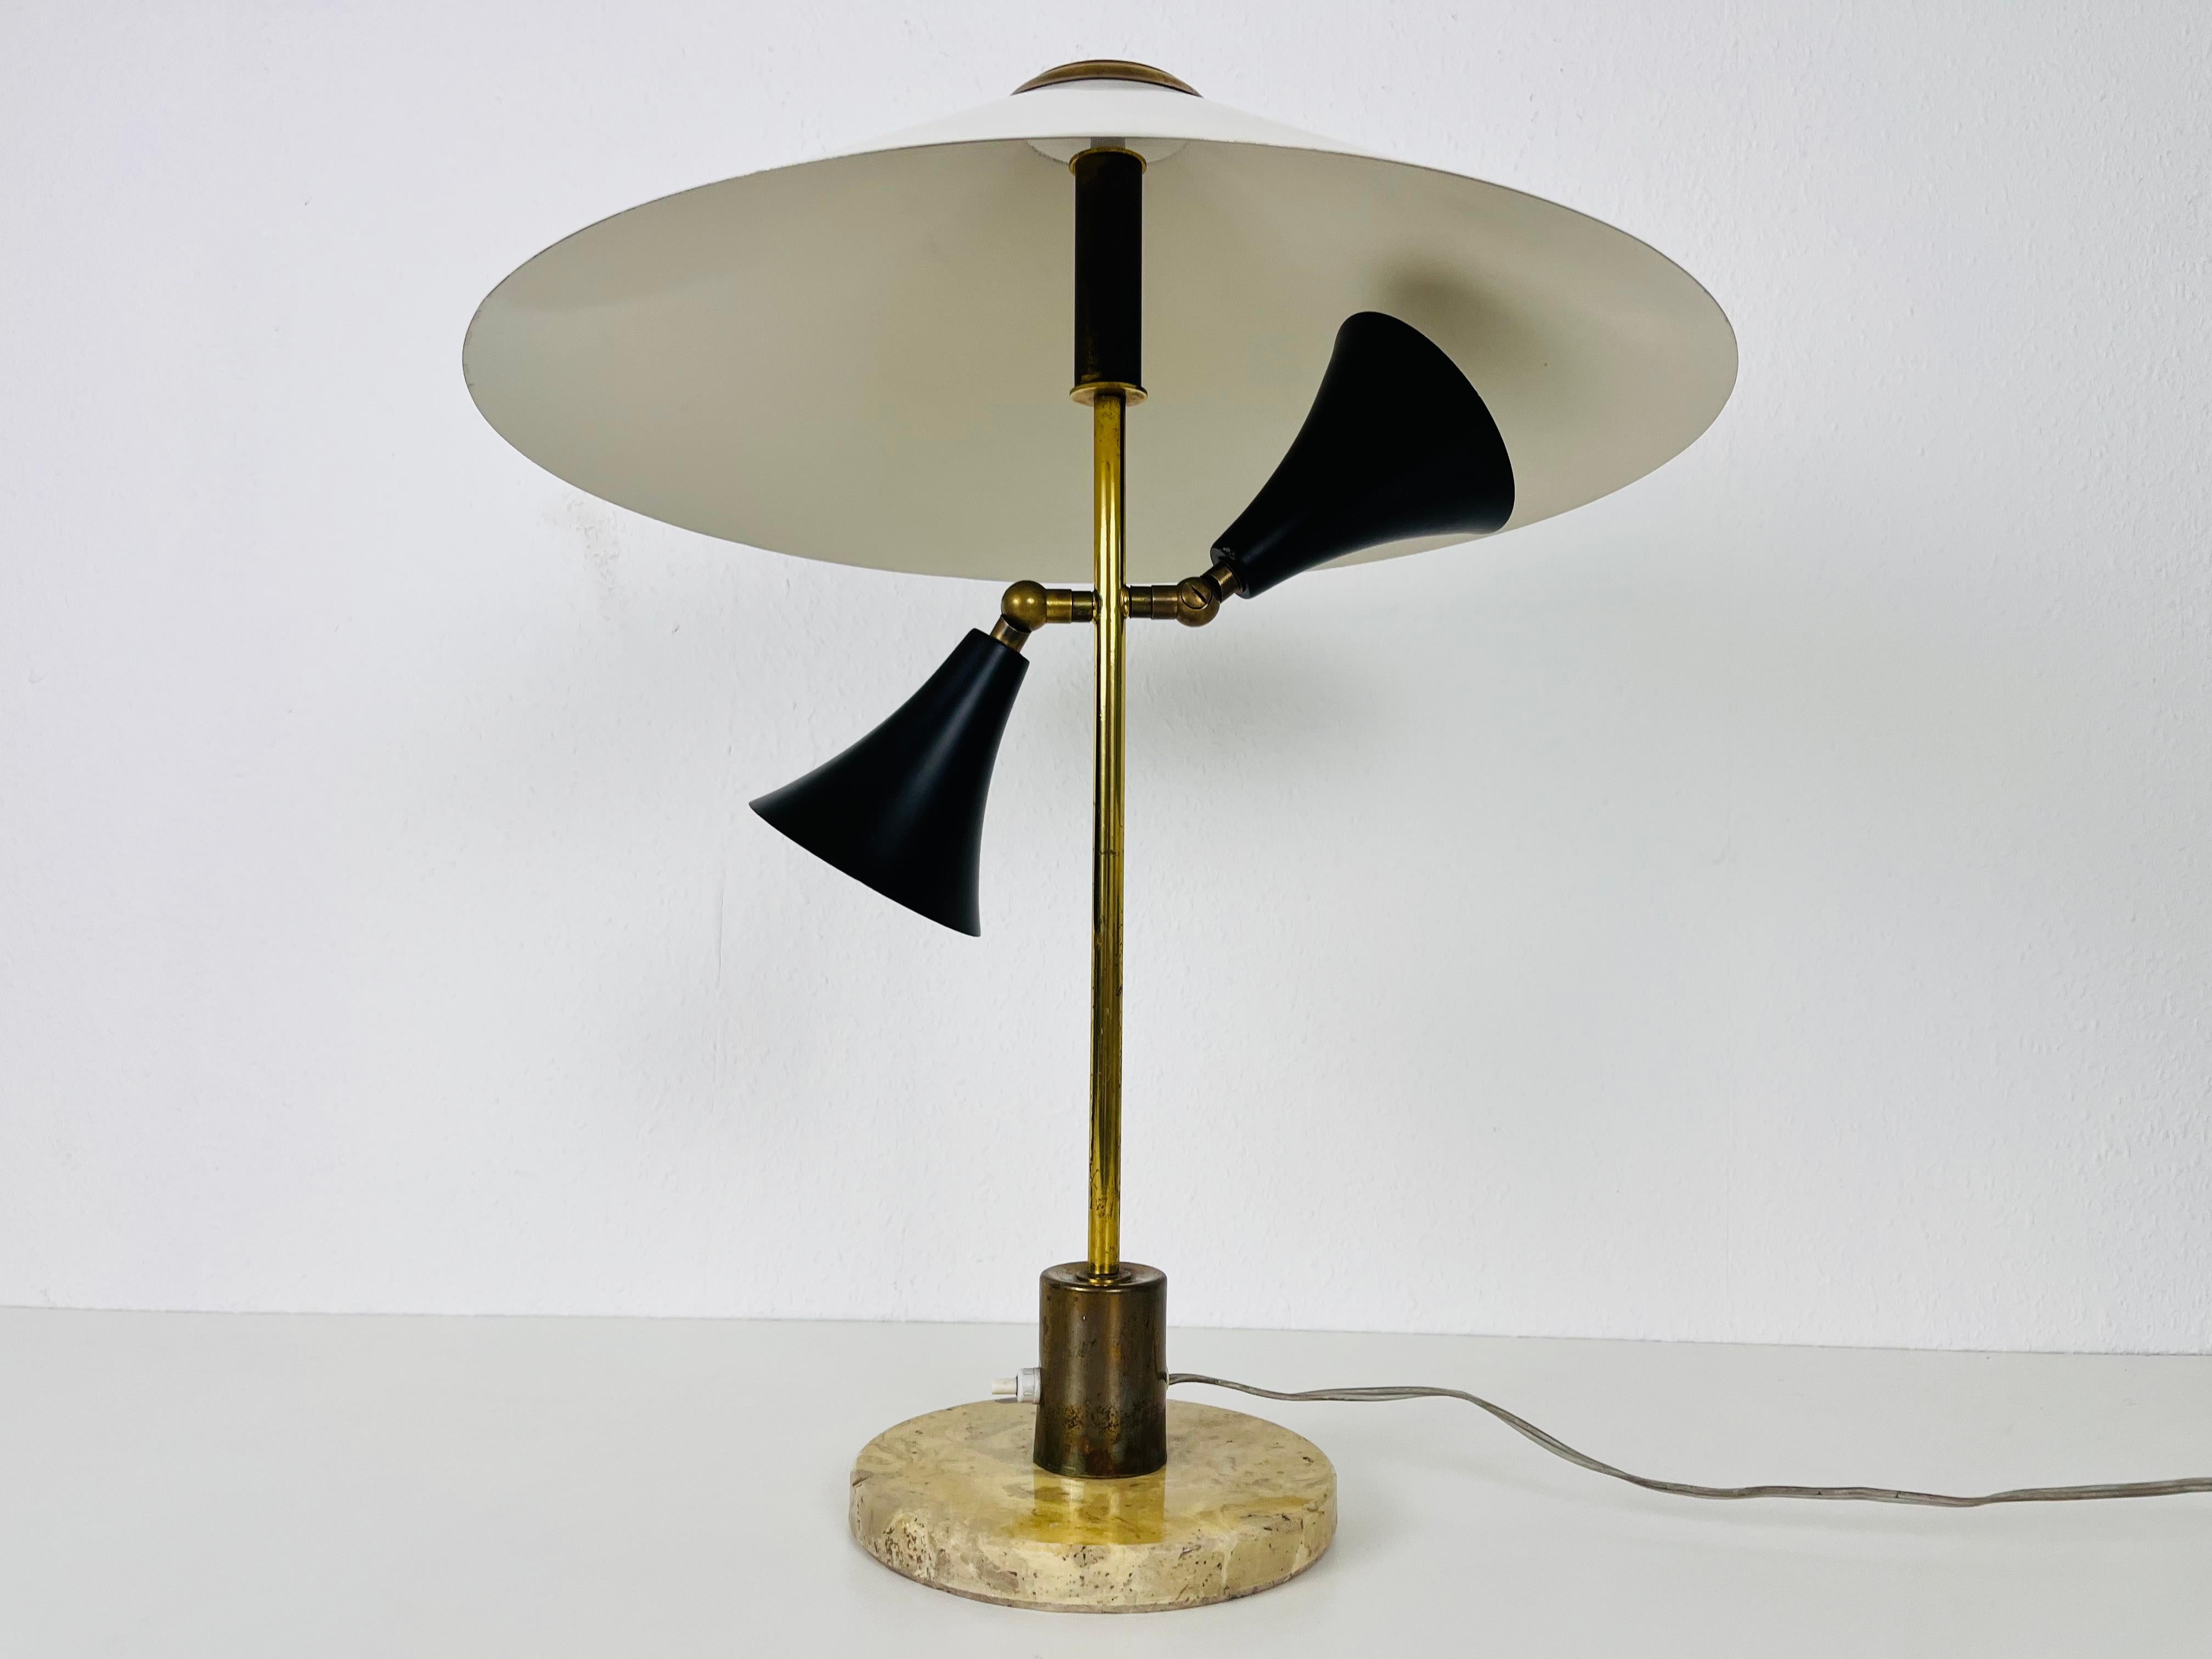 An Italian table lamp made in the 1960s. The lighting has an exceptional design which is similar to the table lamps made by Stilnovo. It is made of brass with a beautiful metal element. The base is made of solid marble.

The light requires one E27